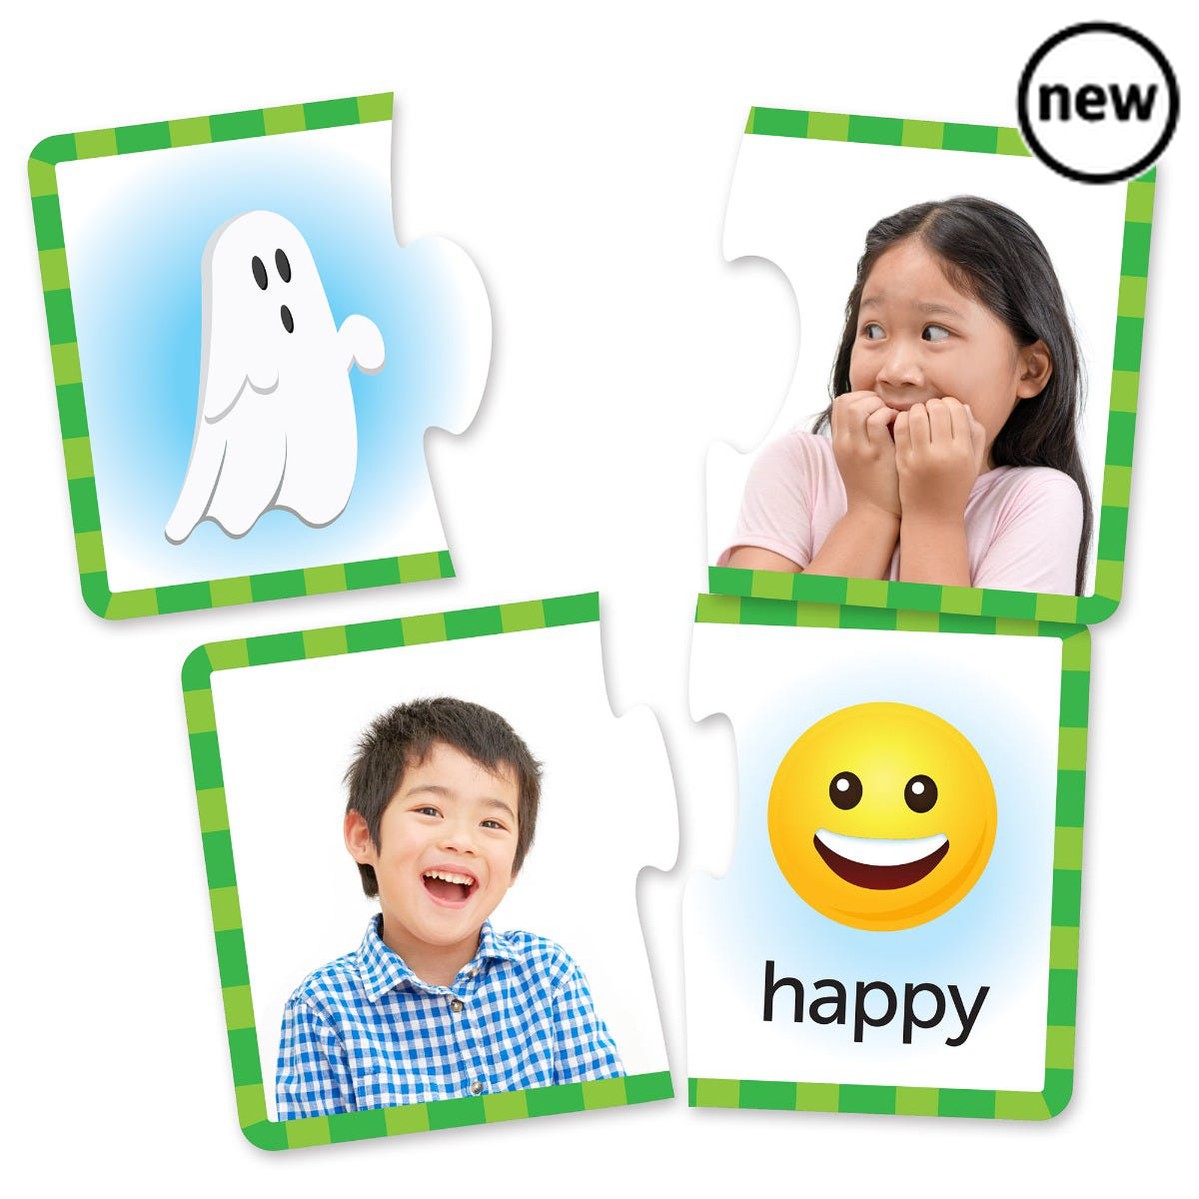 Feelings & Emotions Puzzle Cards, Help preschoolers build social emotional learning (SEL) skills with these colourful Feelings & Emotions Puzzle Cards. Each 2-piece puzzle shows a full colour photo of a real child making a facial expression on a piece, with a colourful corresponding emoji on the other piece. The puzzles are keyed differently, which means there’s only one correct solution. This allows children to self-correct and learn independently. Includes 24 puzzles in a reusable storage box with carry h